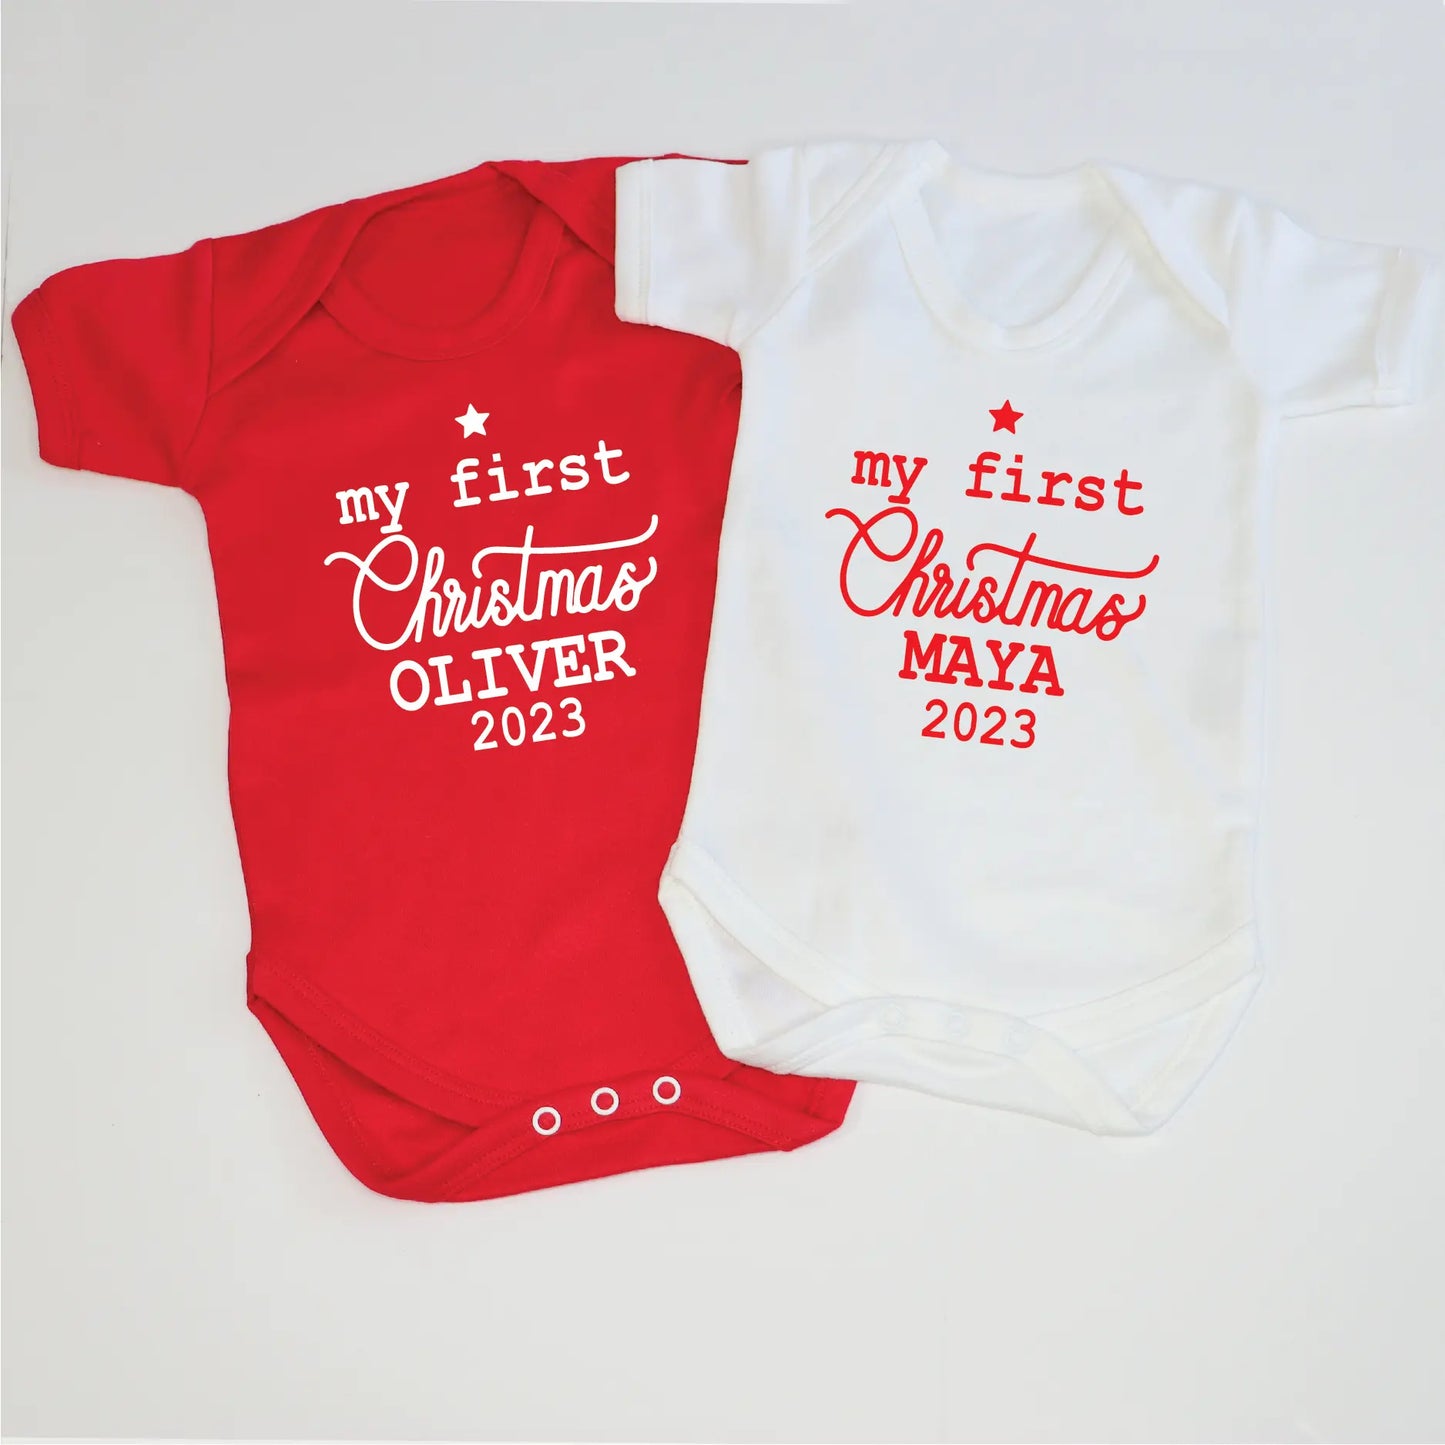 My first Christmas T-shirts